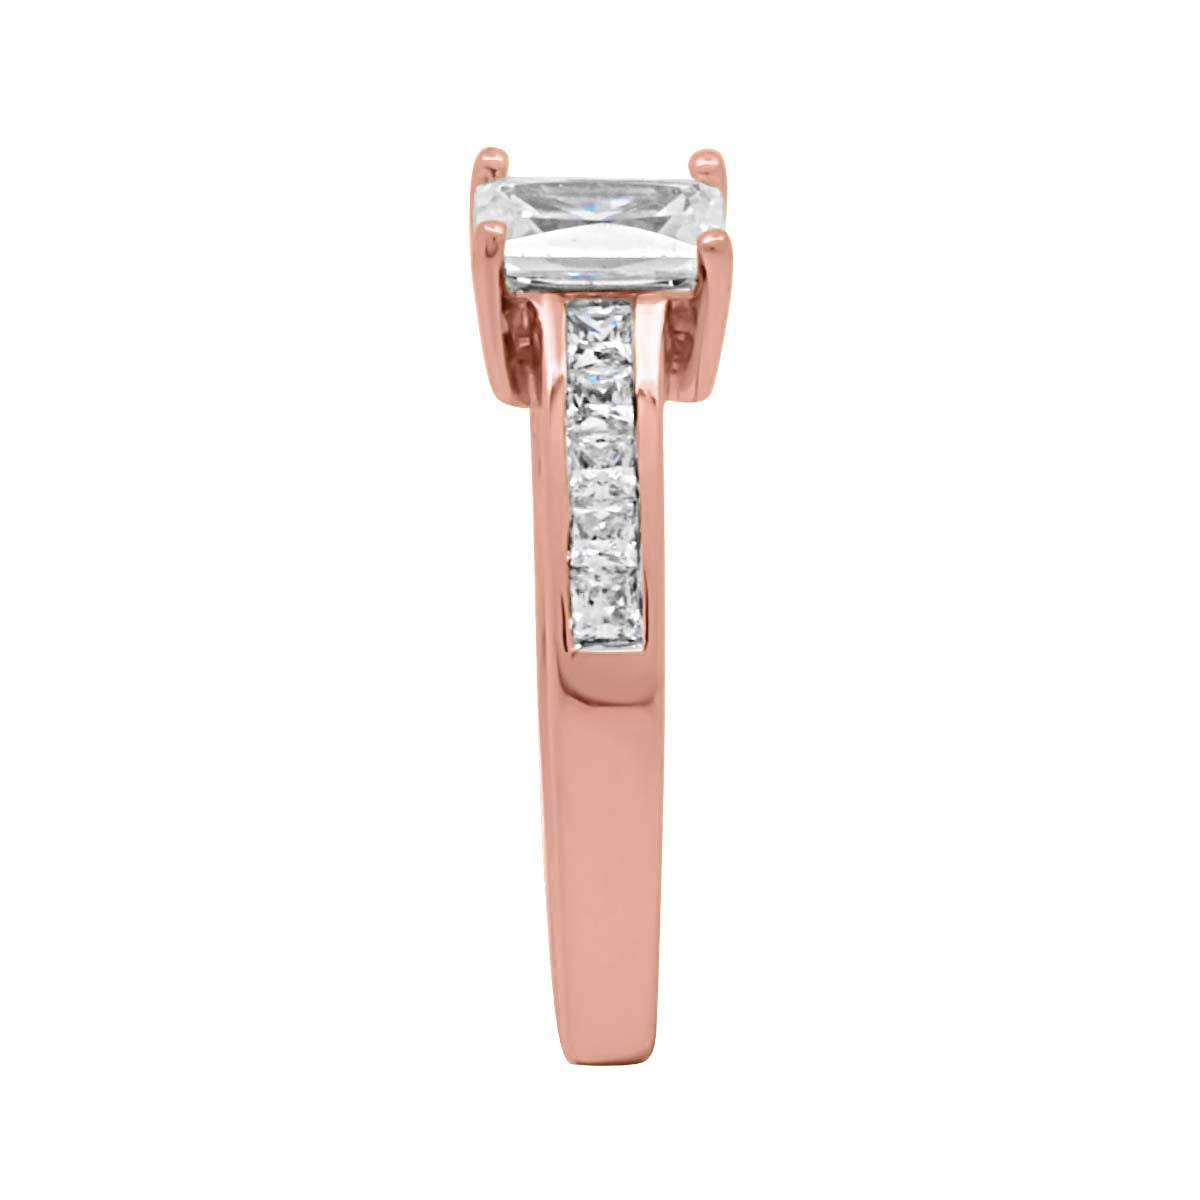 Radiant Cut Engagement Ring in rose gold from a standing side view